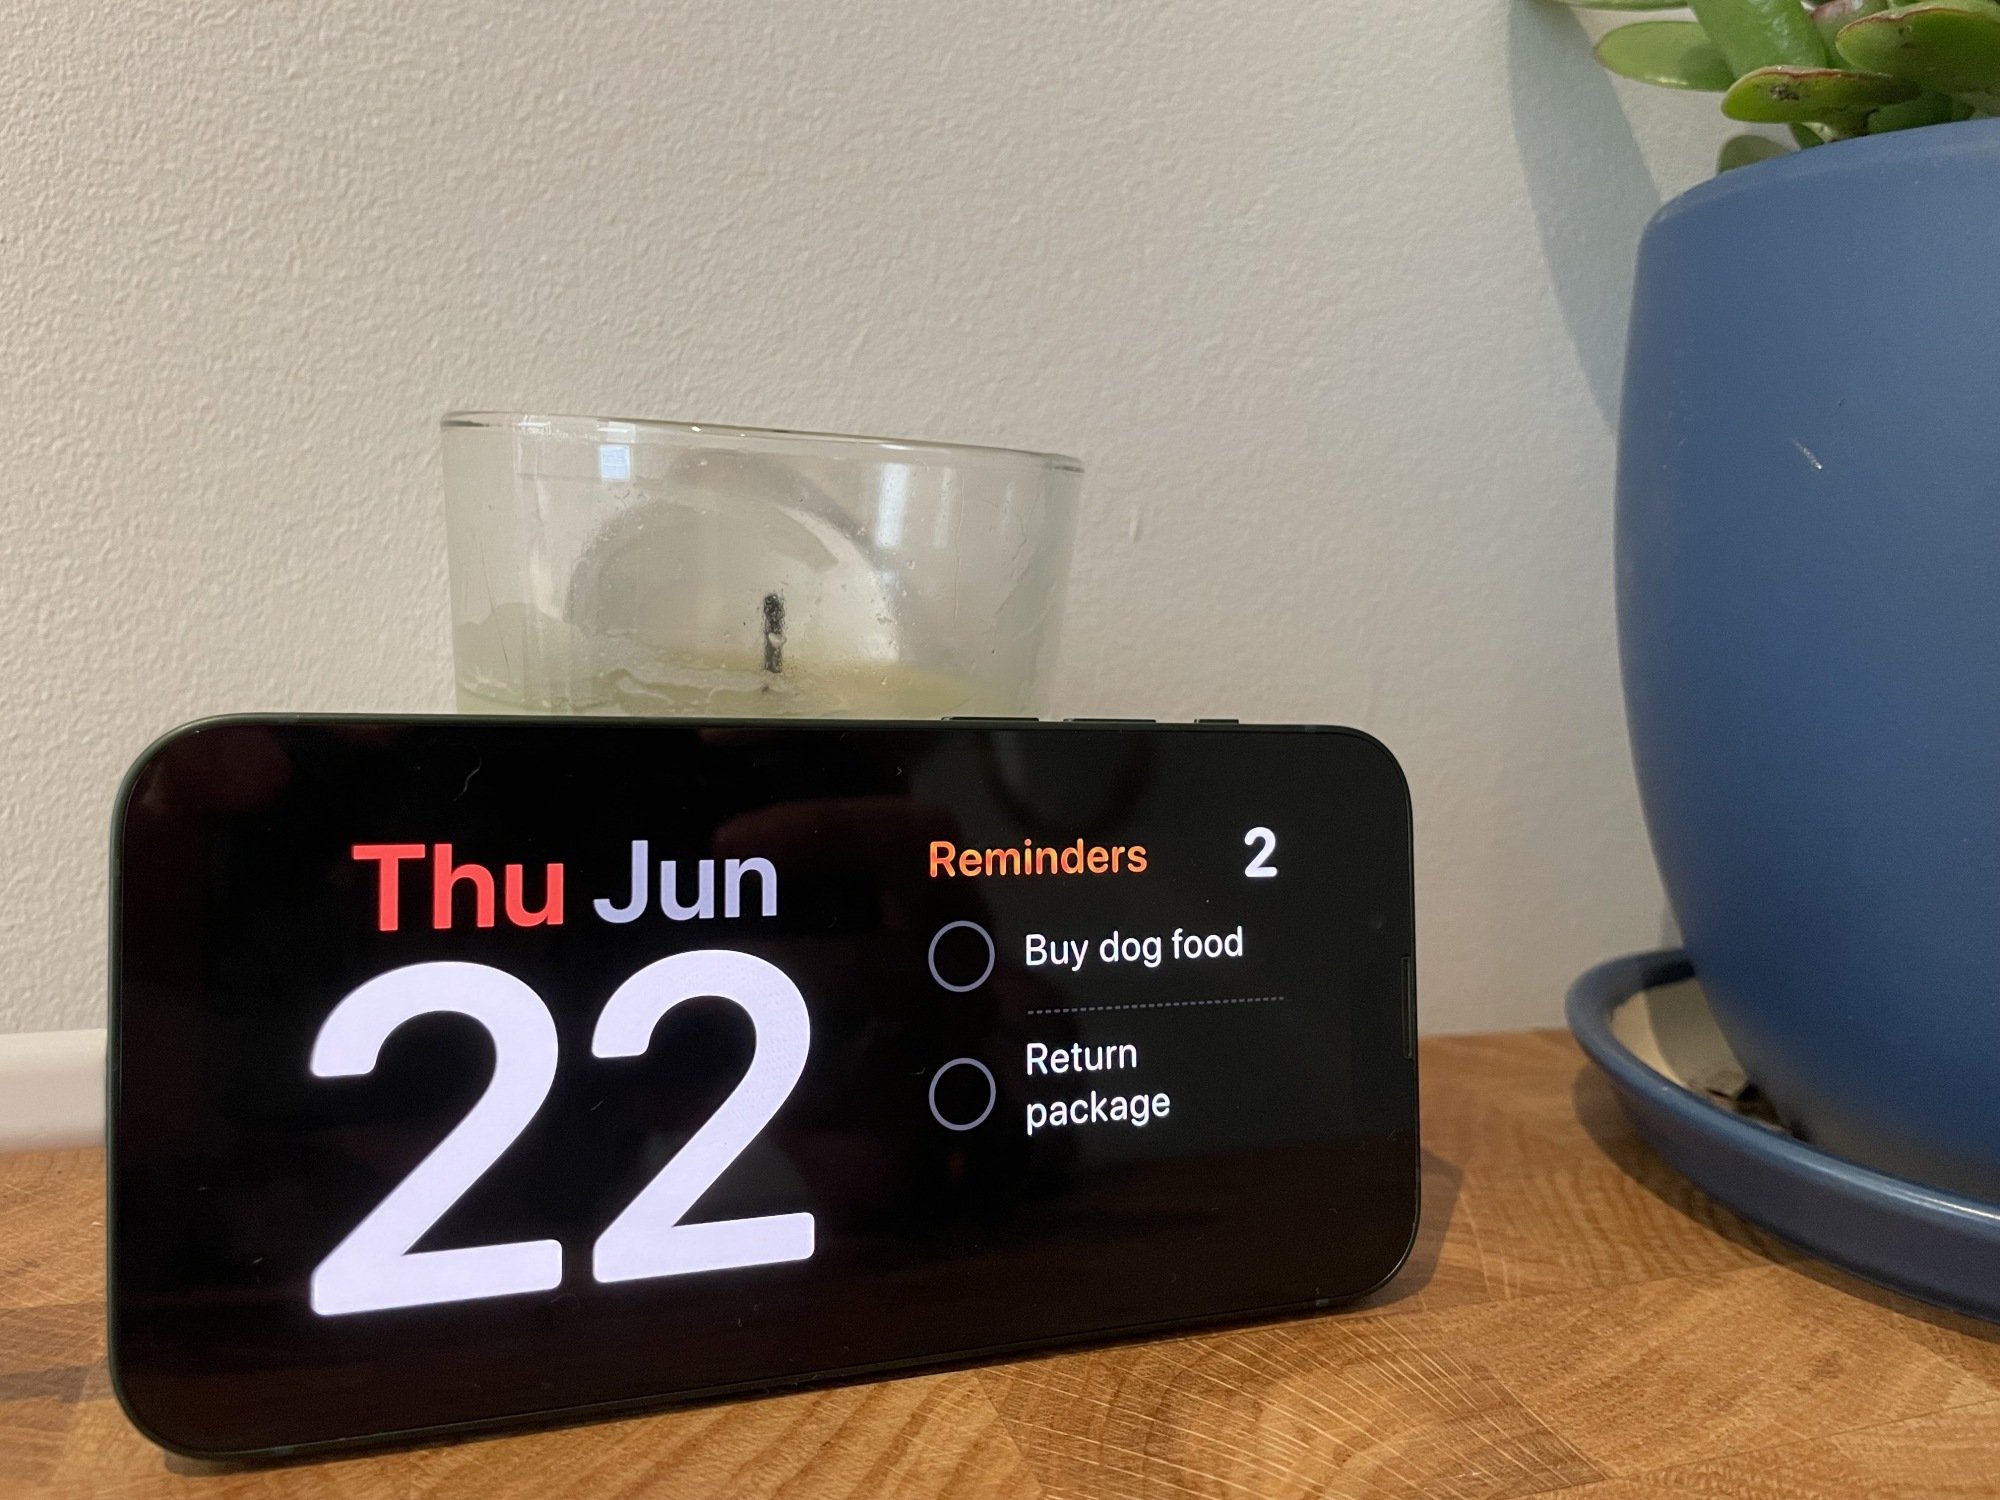 StandBy on iOS 17 showing the date and reminders